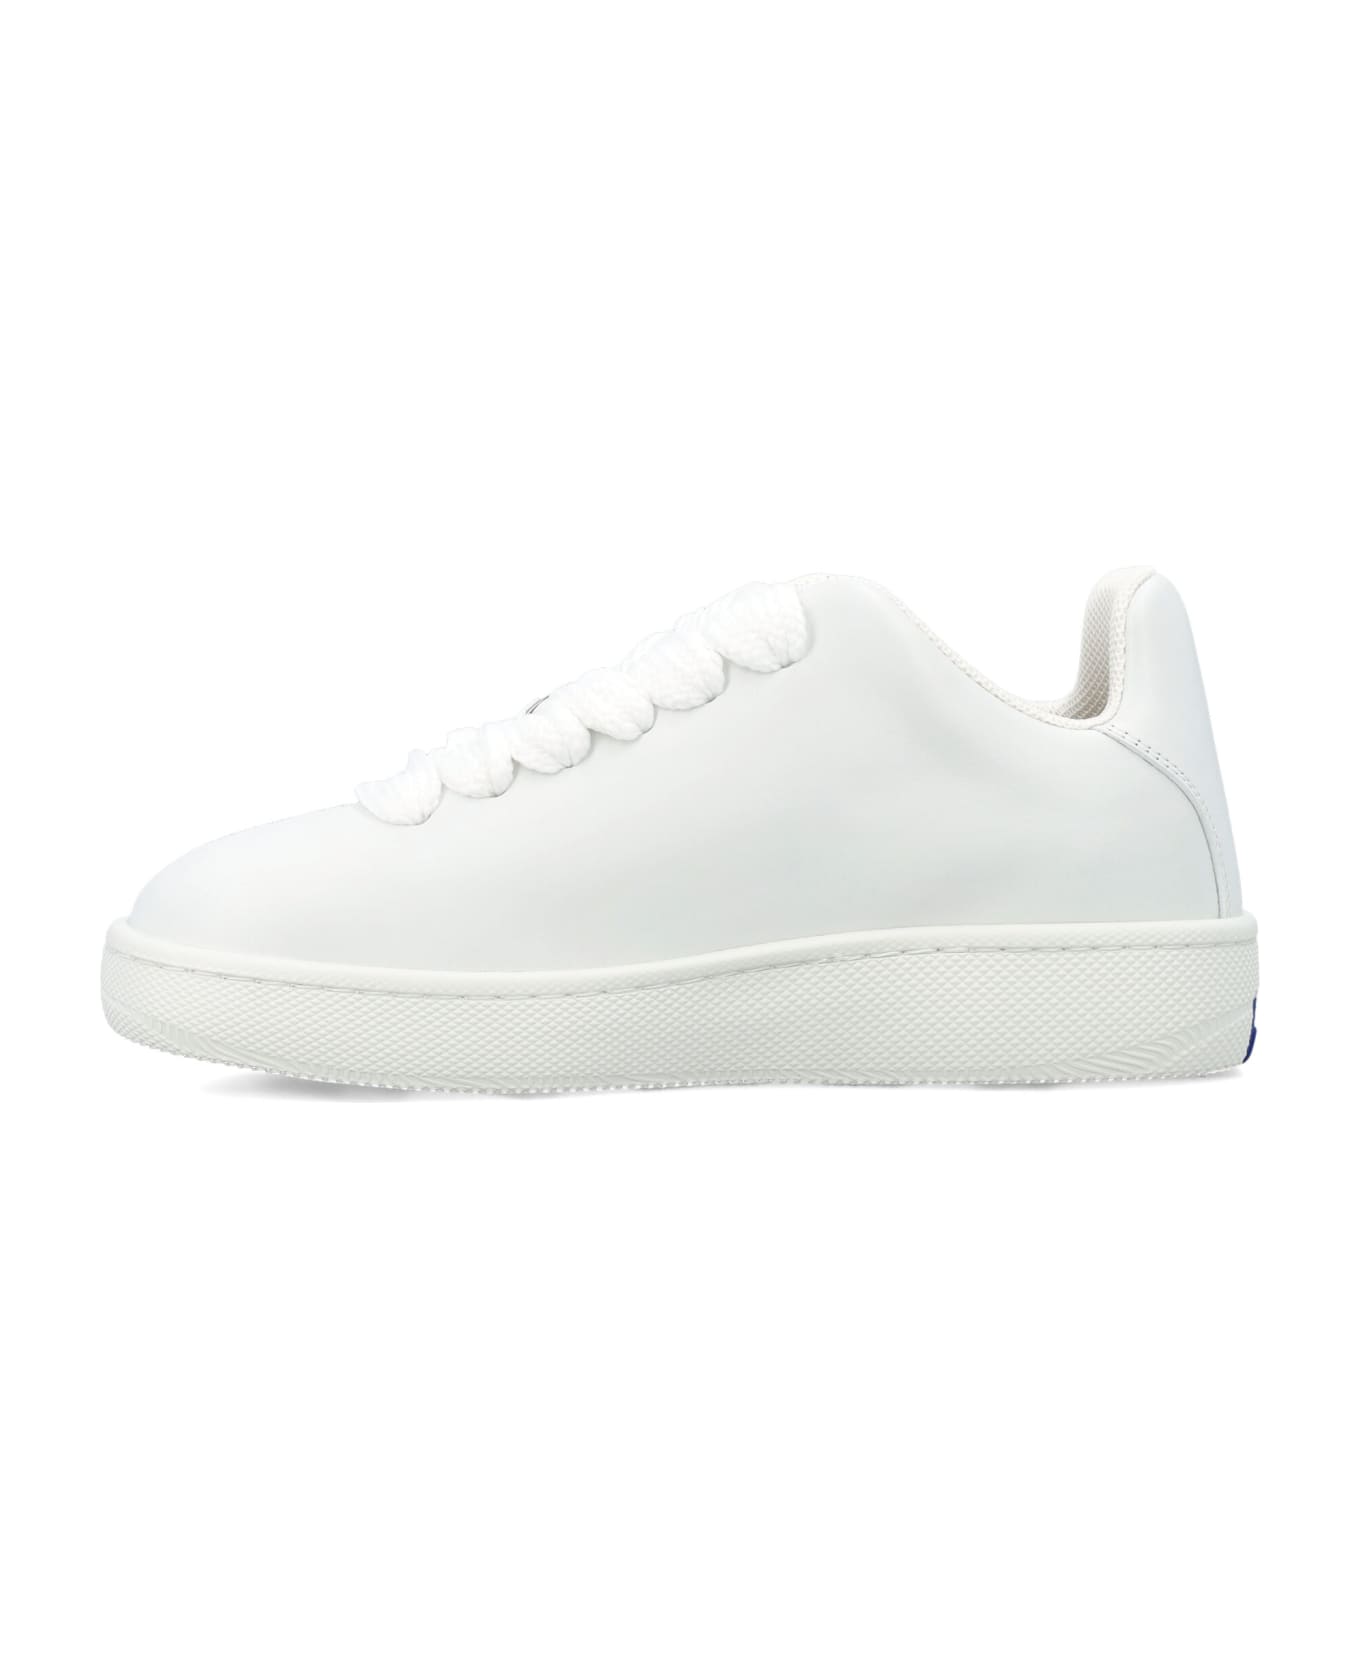 Burberry London Leather Box Sneakers - WHITE